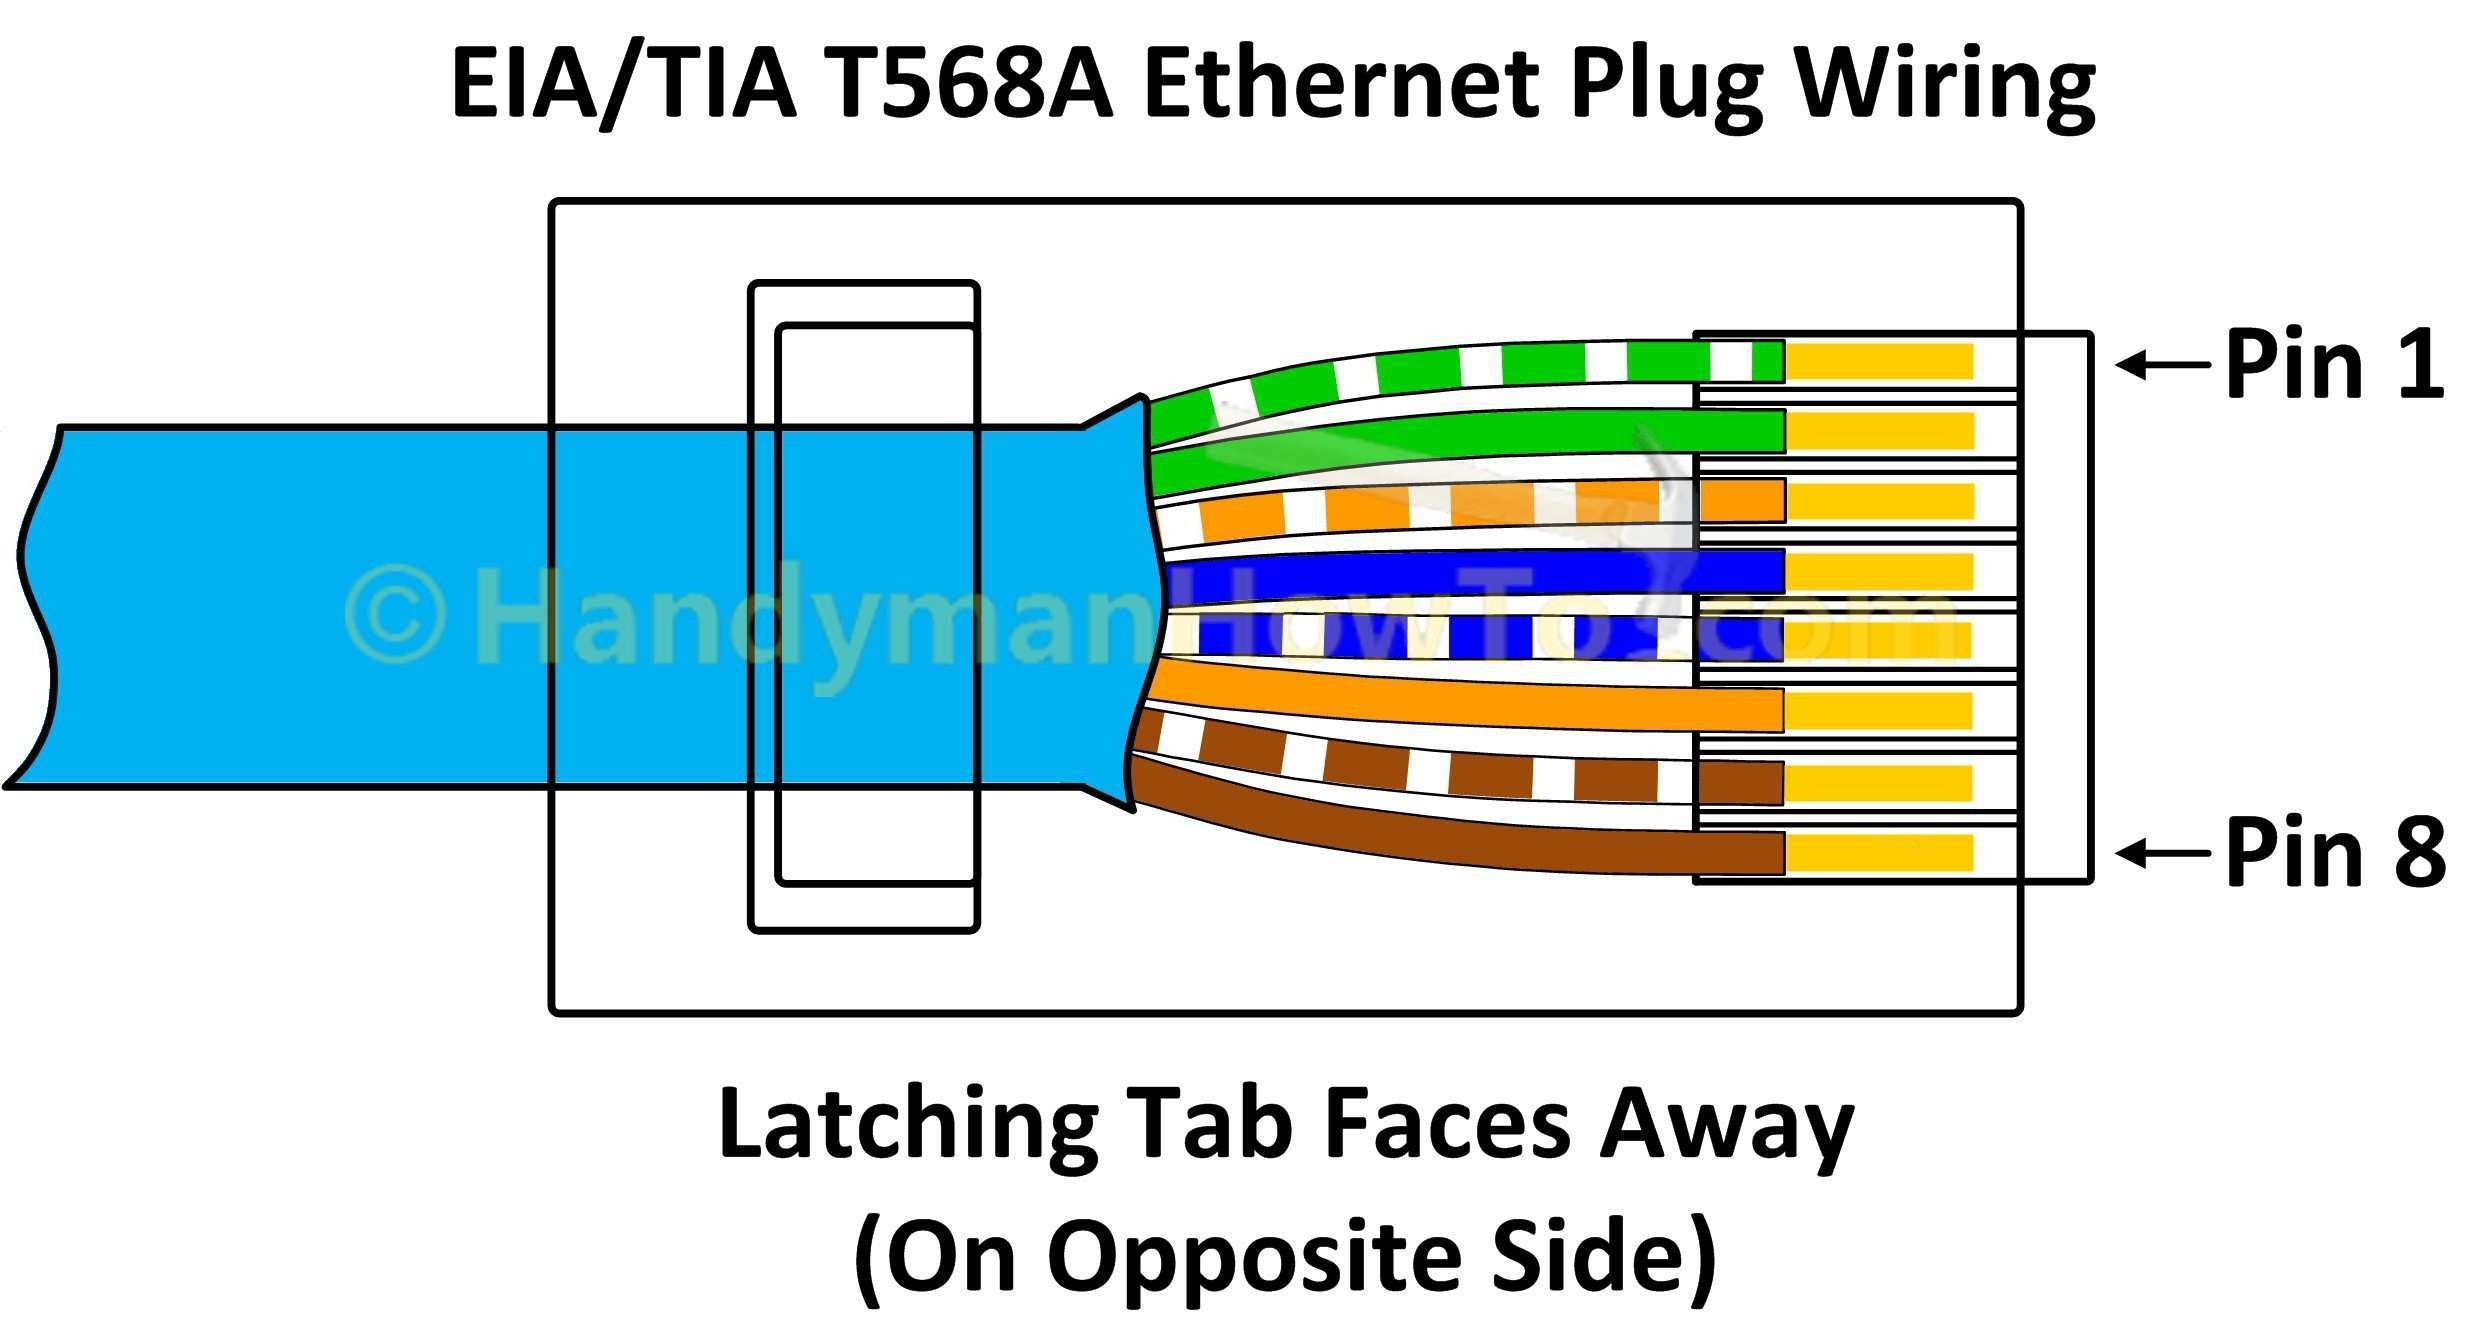 Cat 6 Wiring Diagram Rj45 Rj45 Straight Wiring Diagram Best How to Make An Ethernet